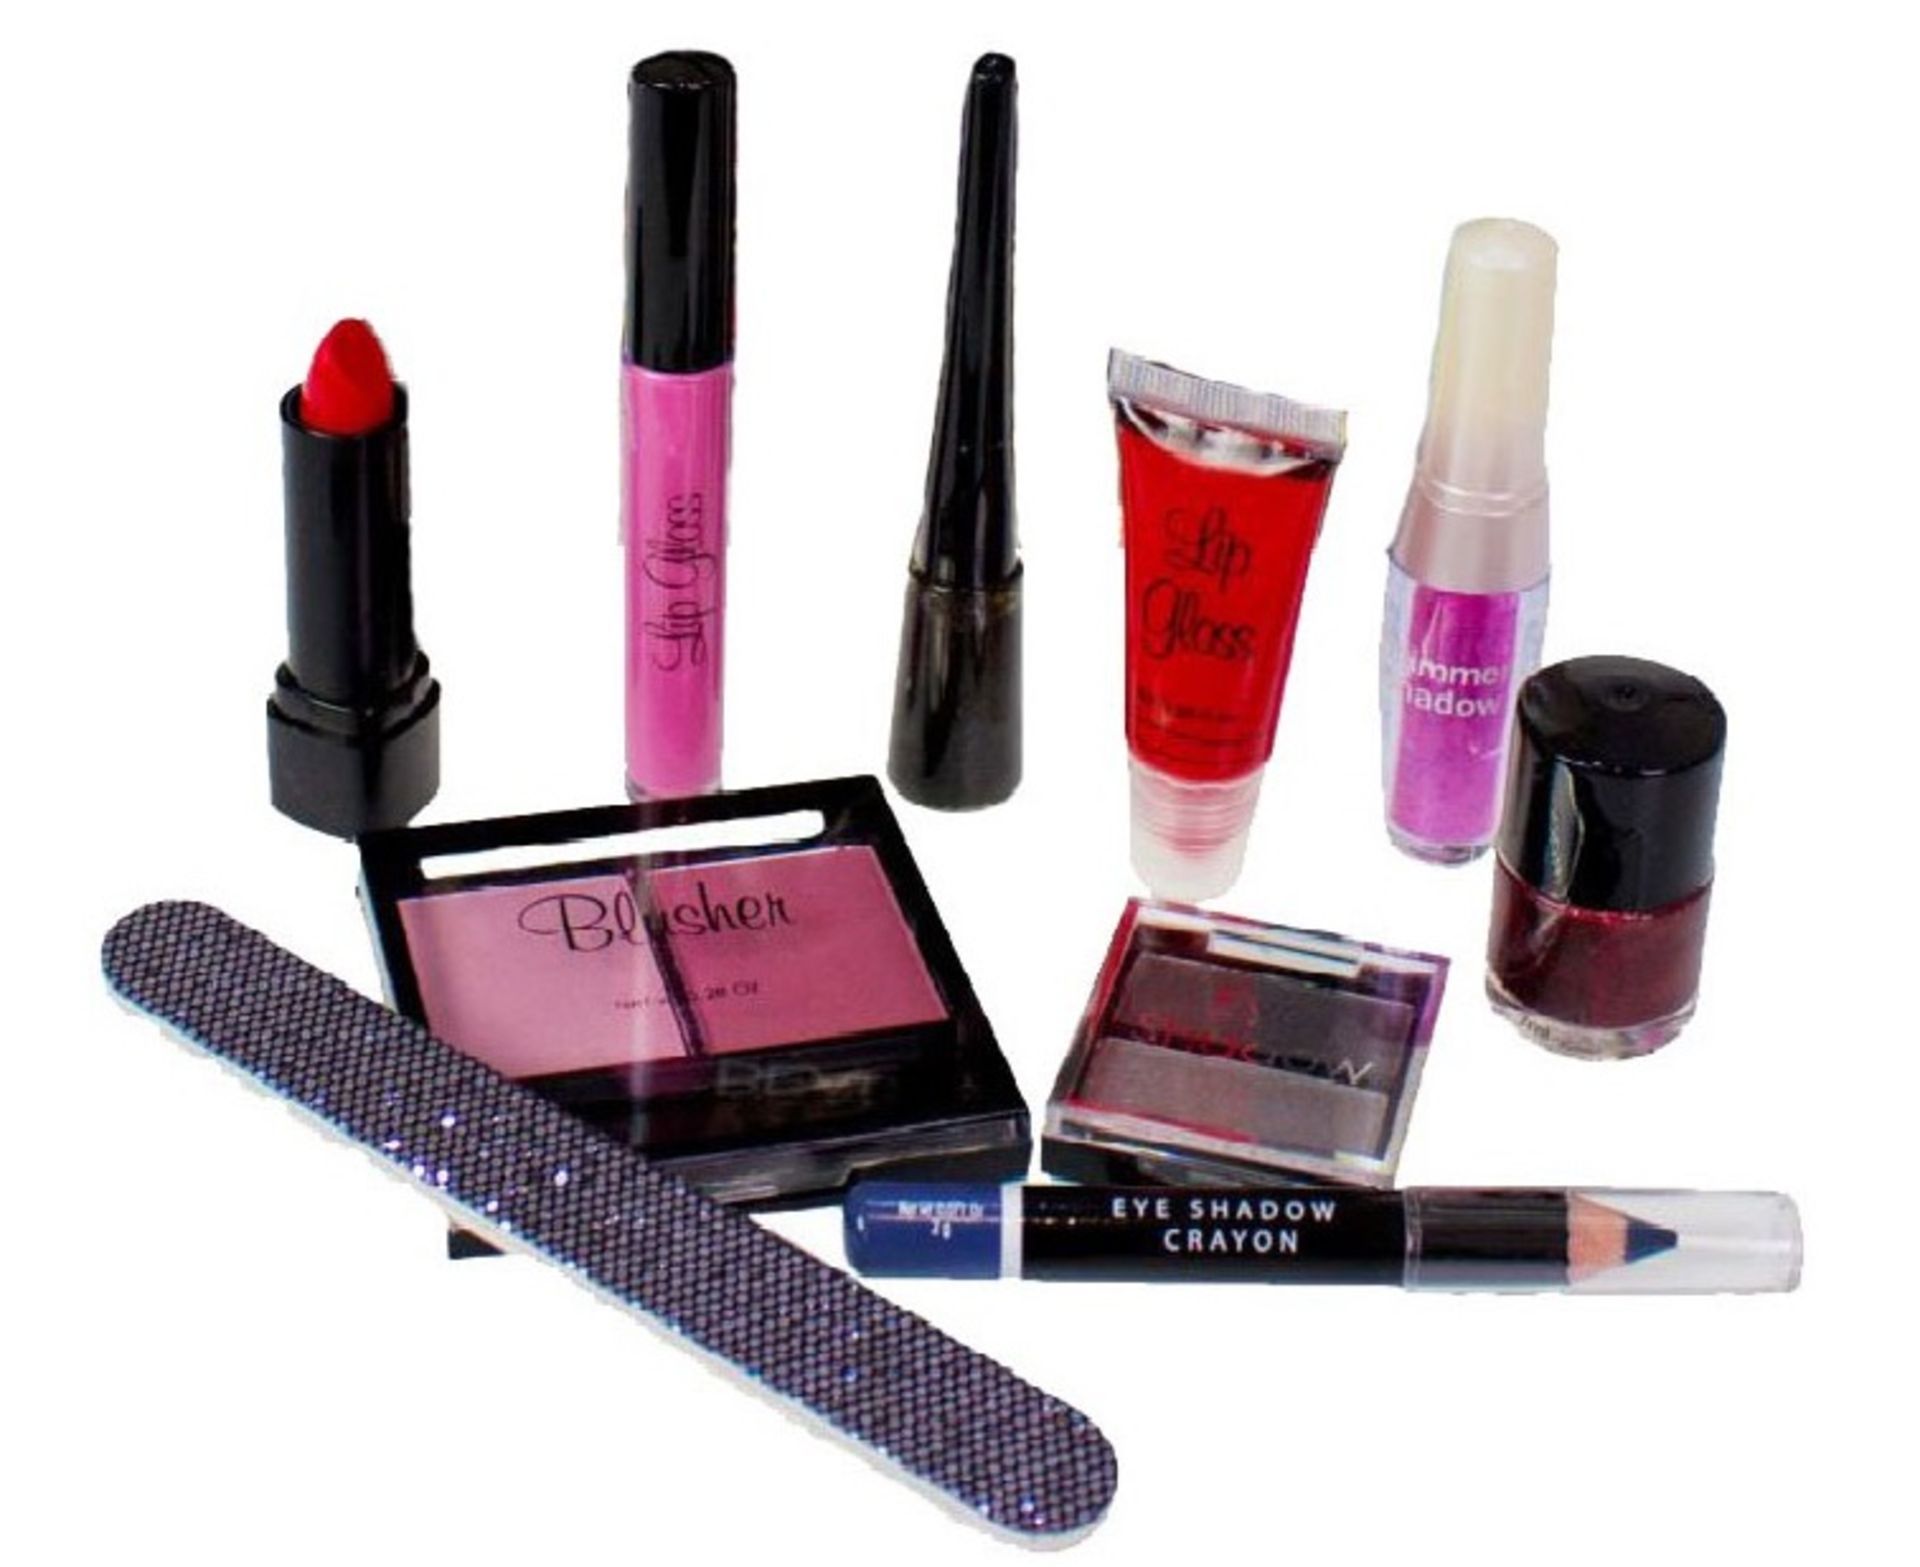 V *TRADE QTY* Brand New Ten Beauty Product Selection in Gift Bag (Contents vary) X 5 YOUR BID